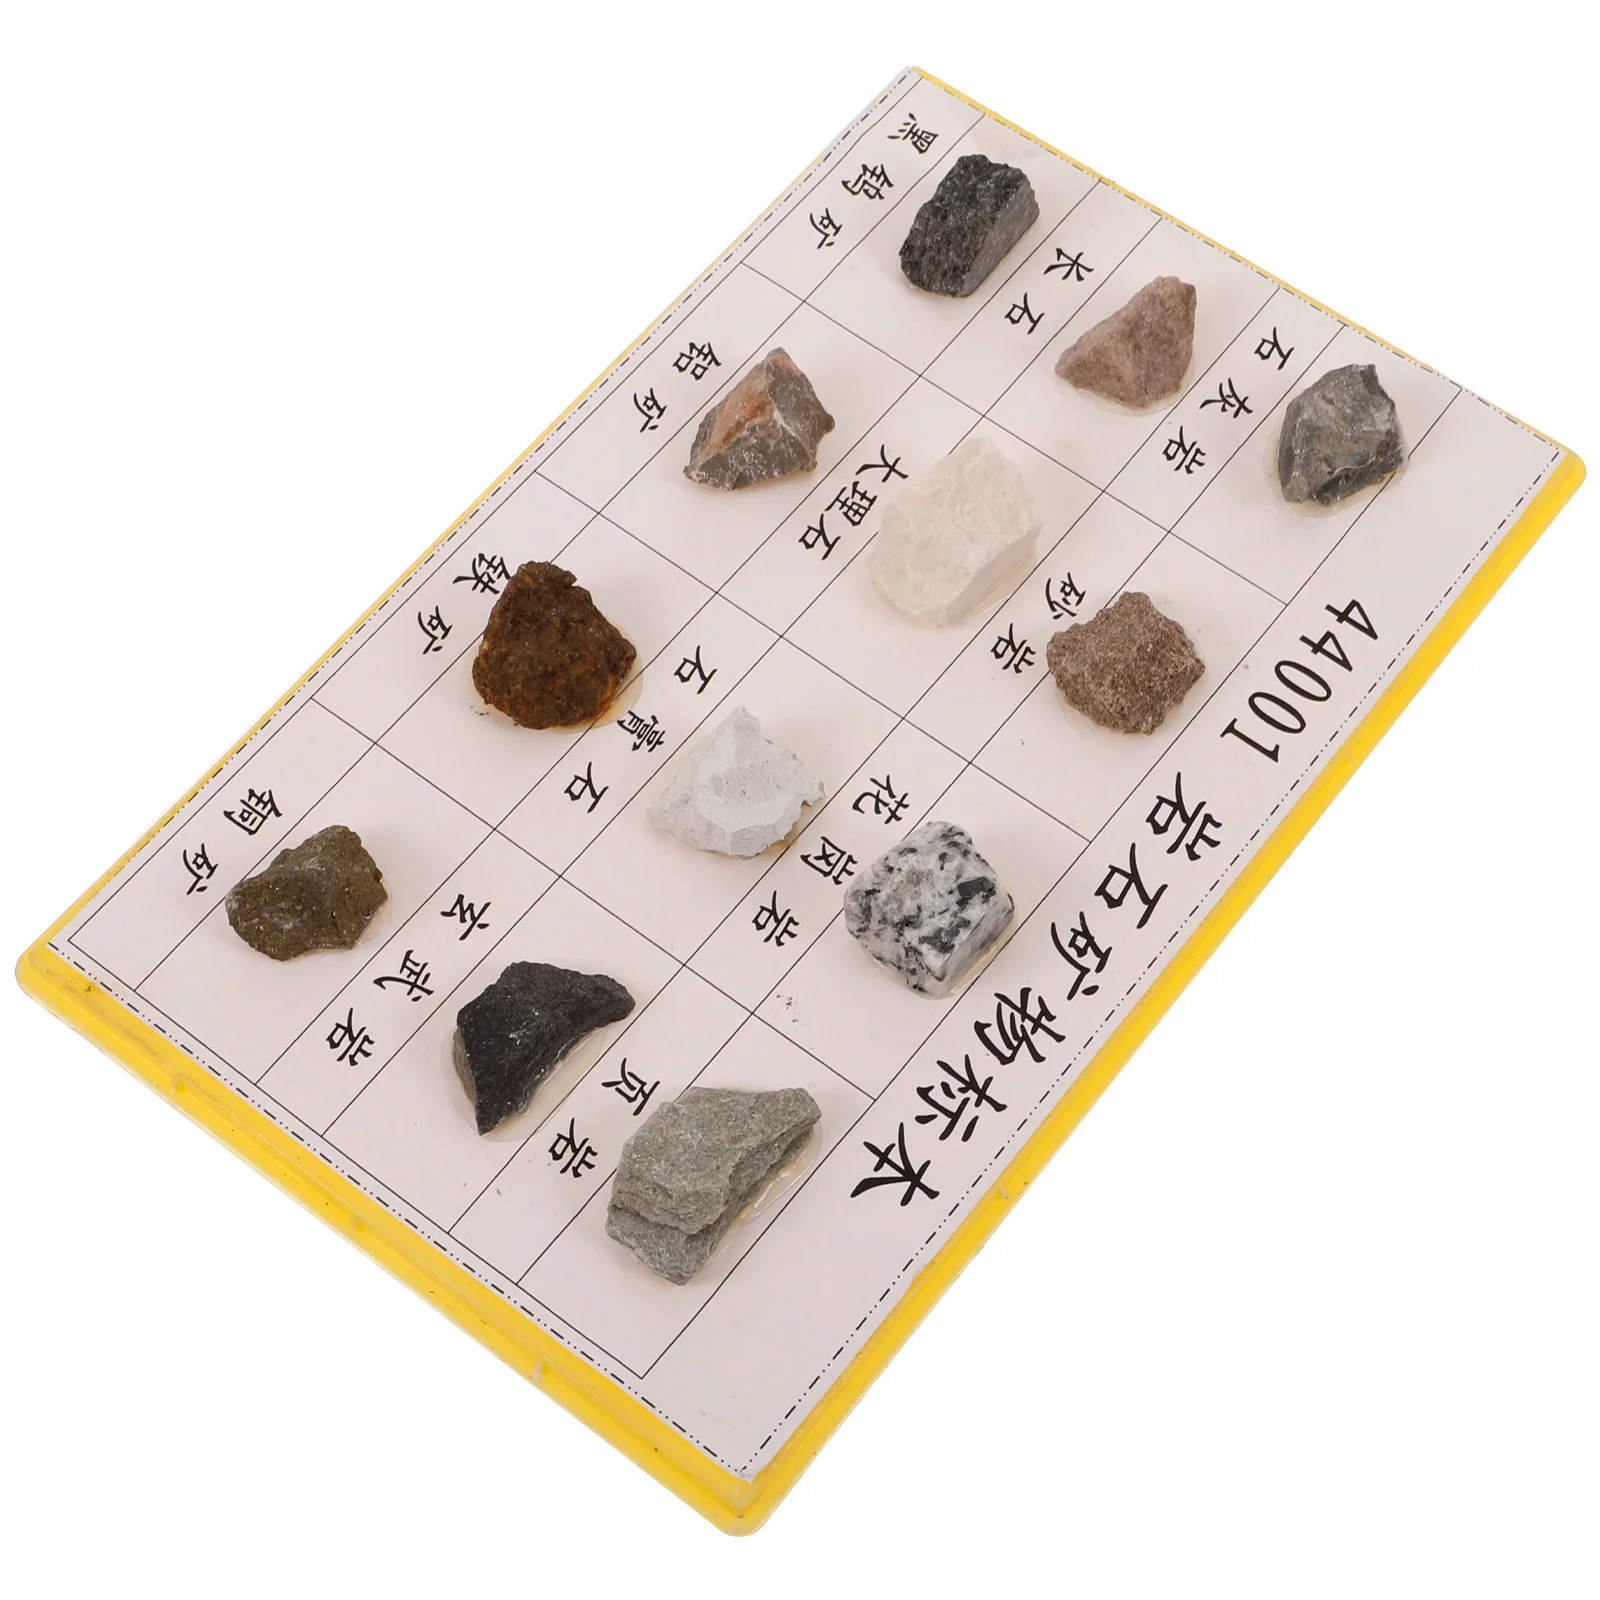 

12 Pcs Rock Specimen Set The Biological Experiment Specimens for Primary and Secondary Schools Mineral